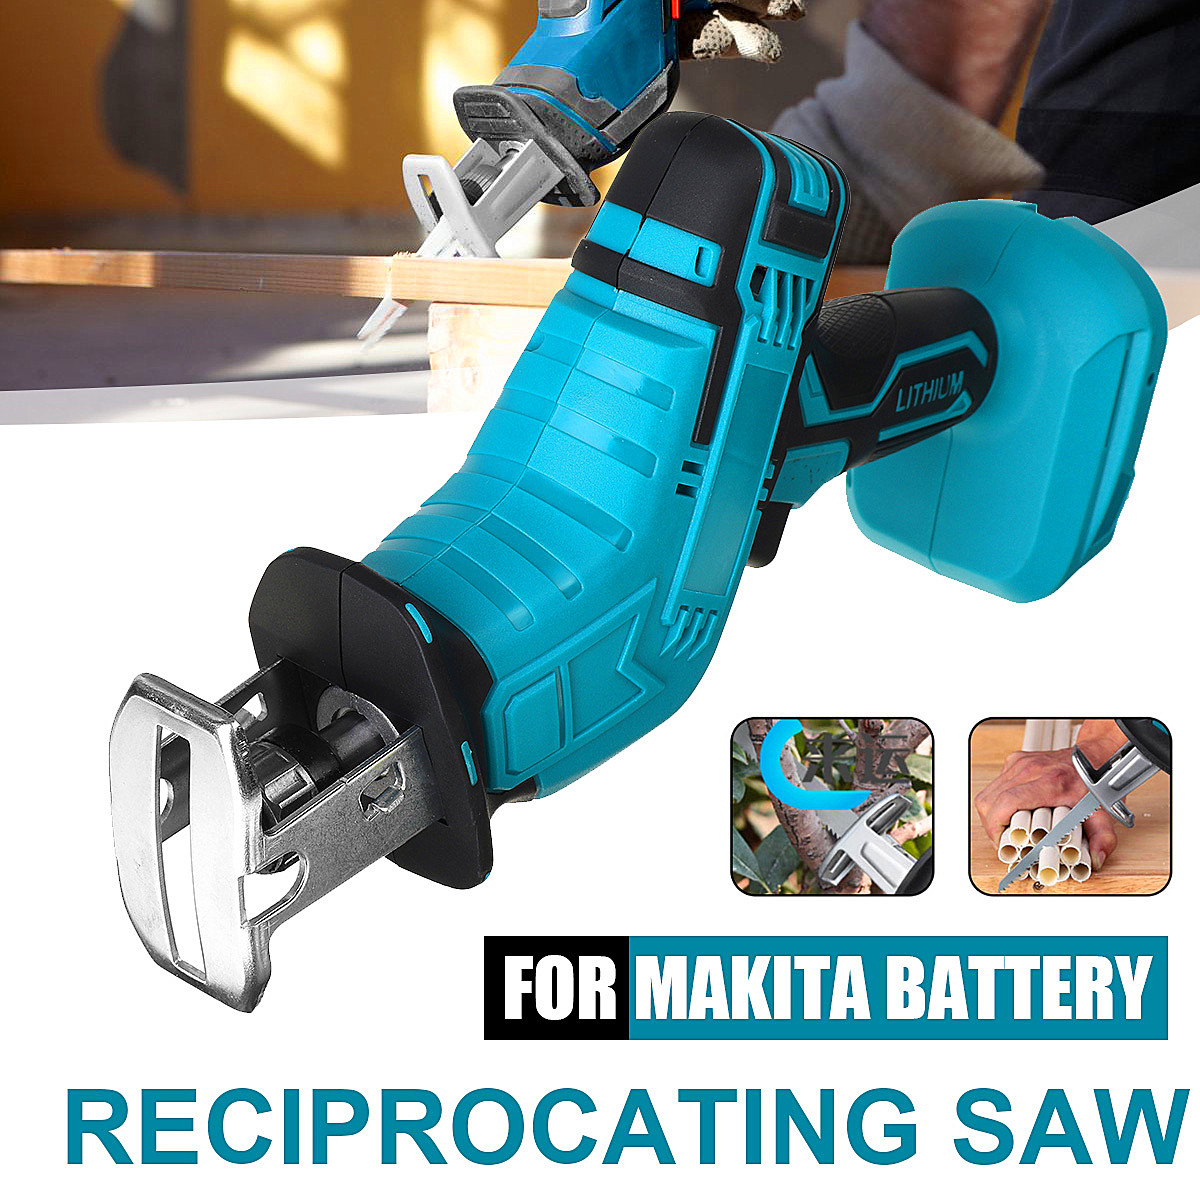 Cordless-Reciprocating-Saw-Portable-Electric-Saw-Wood-Cutting-Tool-For-Makita-18V-Battery-1786908-2